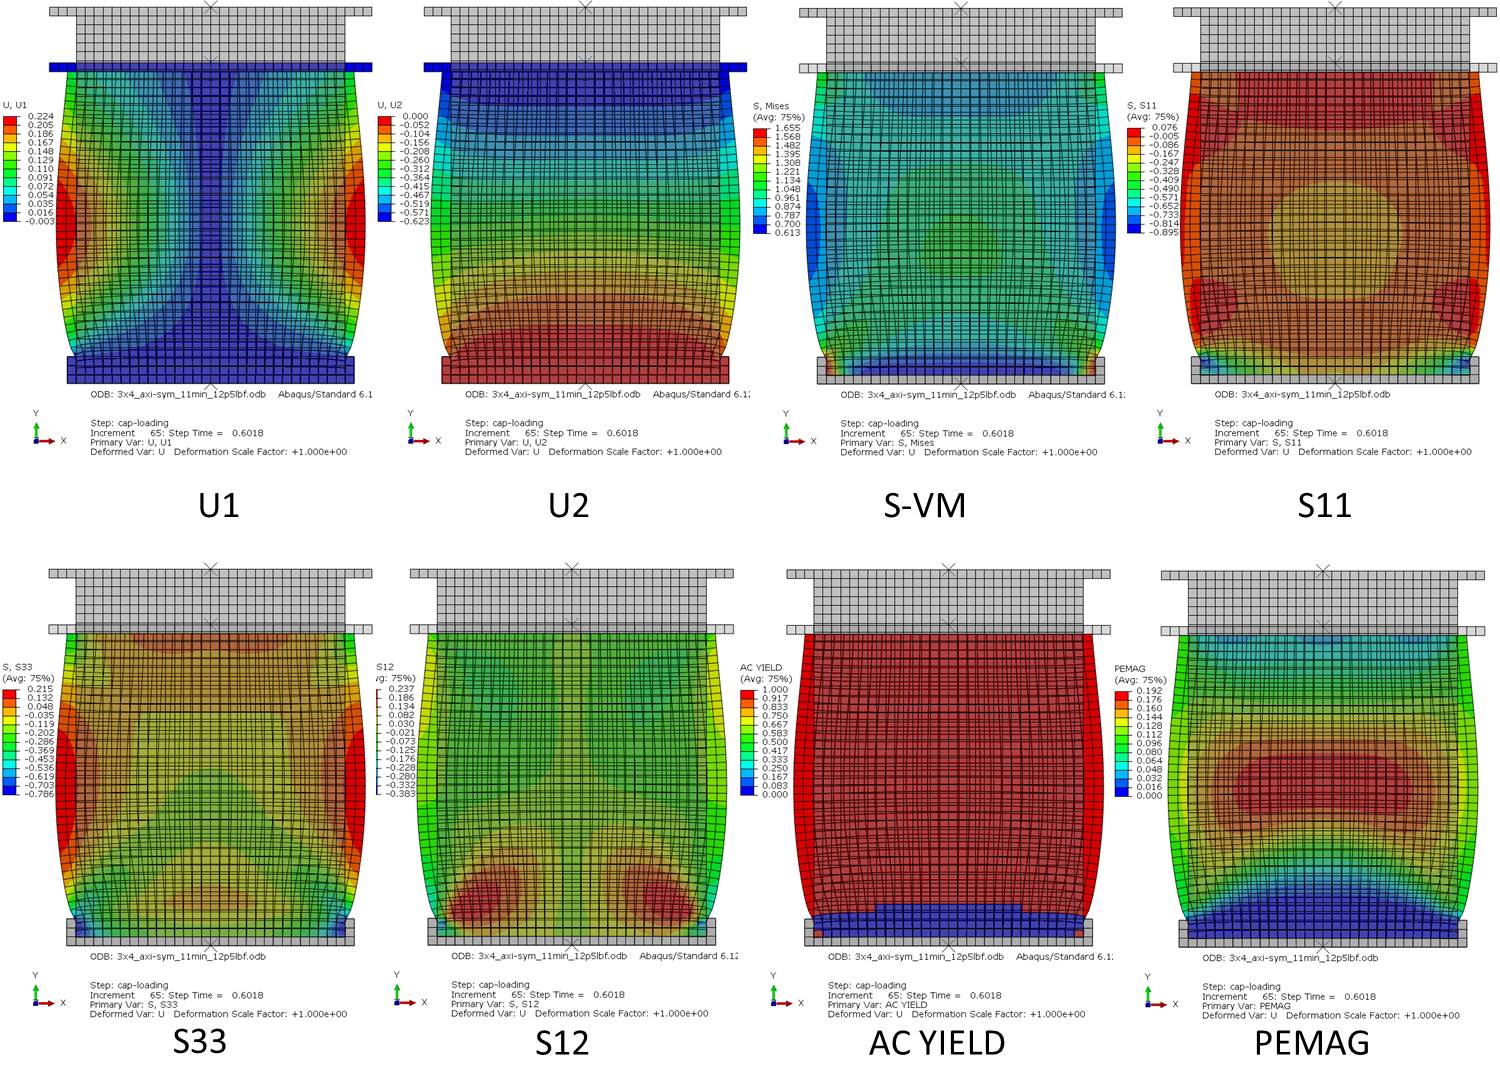 Numerical simulations of fresh mortar specimens loaded in axial compression at specific mortar maturities. The finite element analyses use the linear Drucker-Prager elasto-plastic model (Step-Time=0.60)